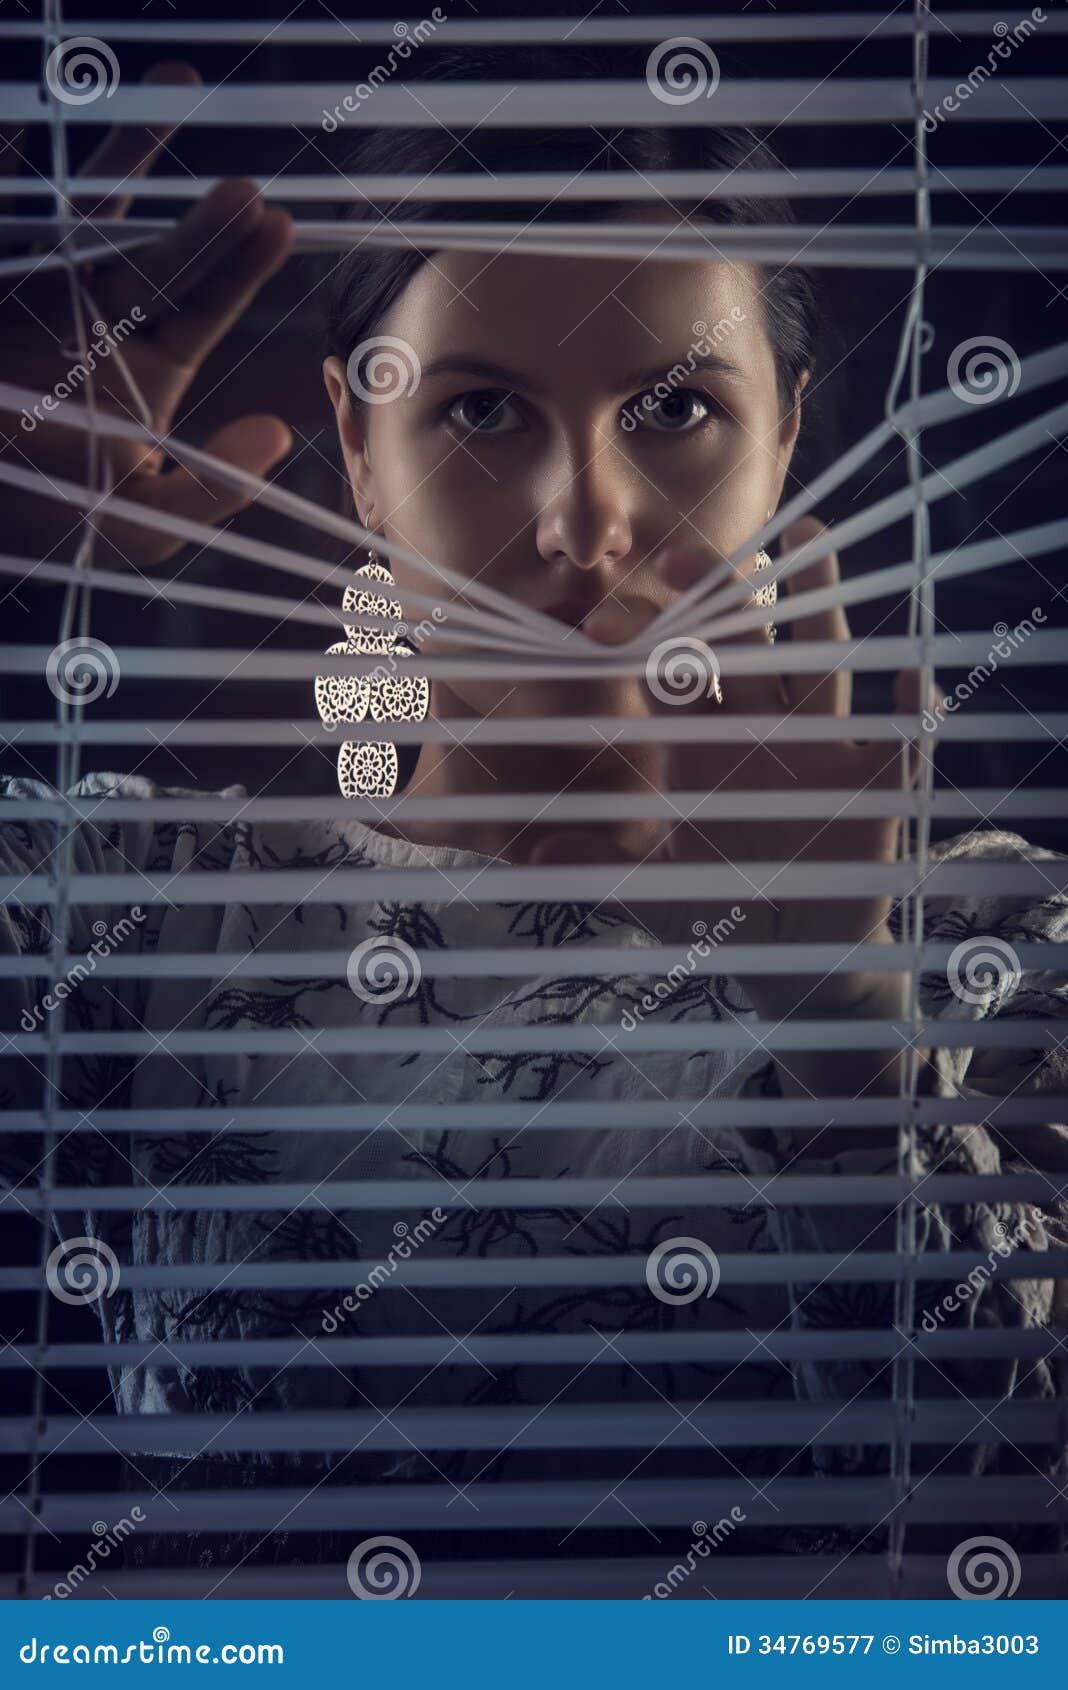 portrait of beautiful mysterious woman looking through jalousie,louver